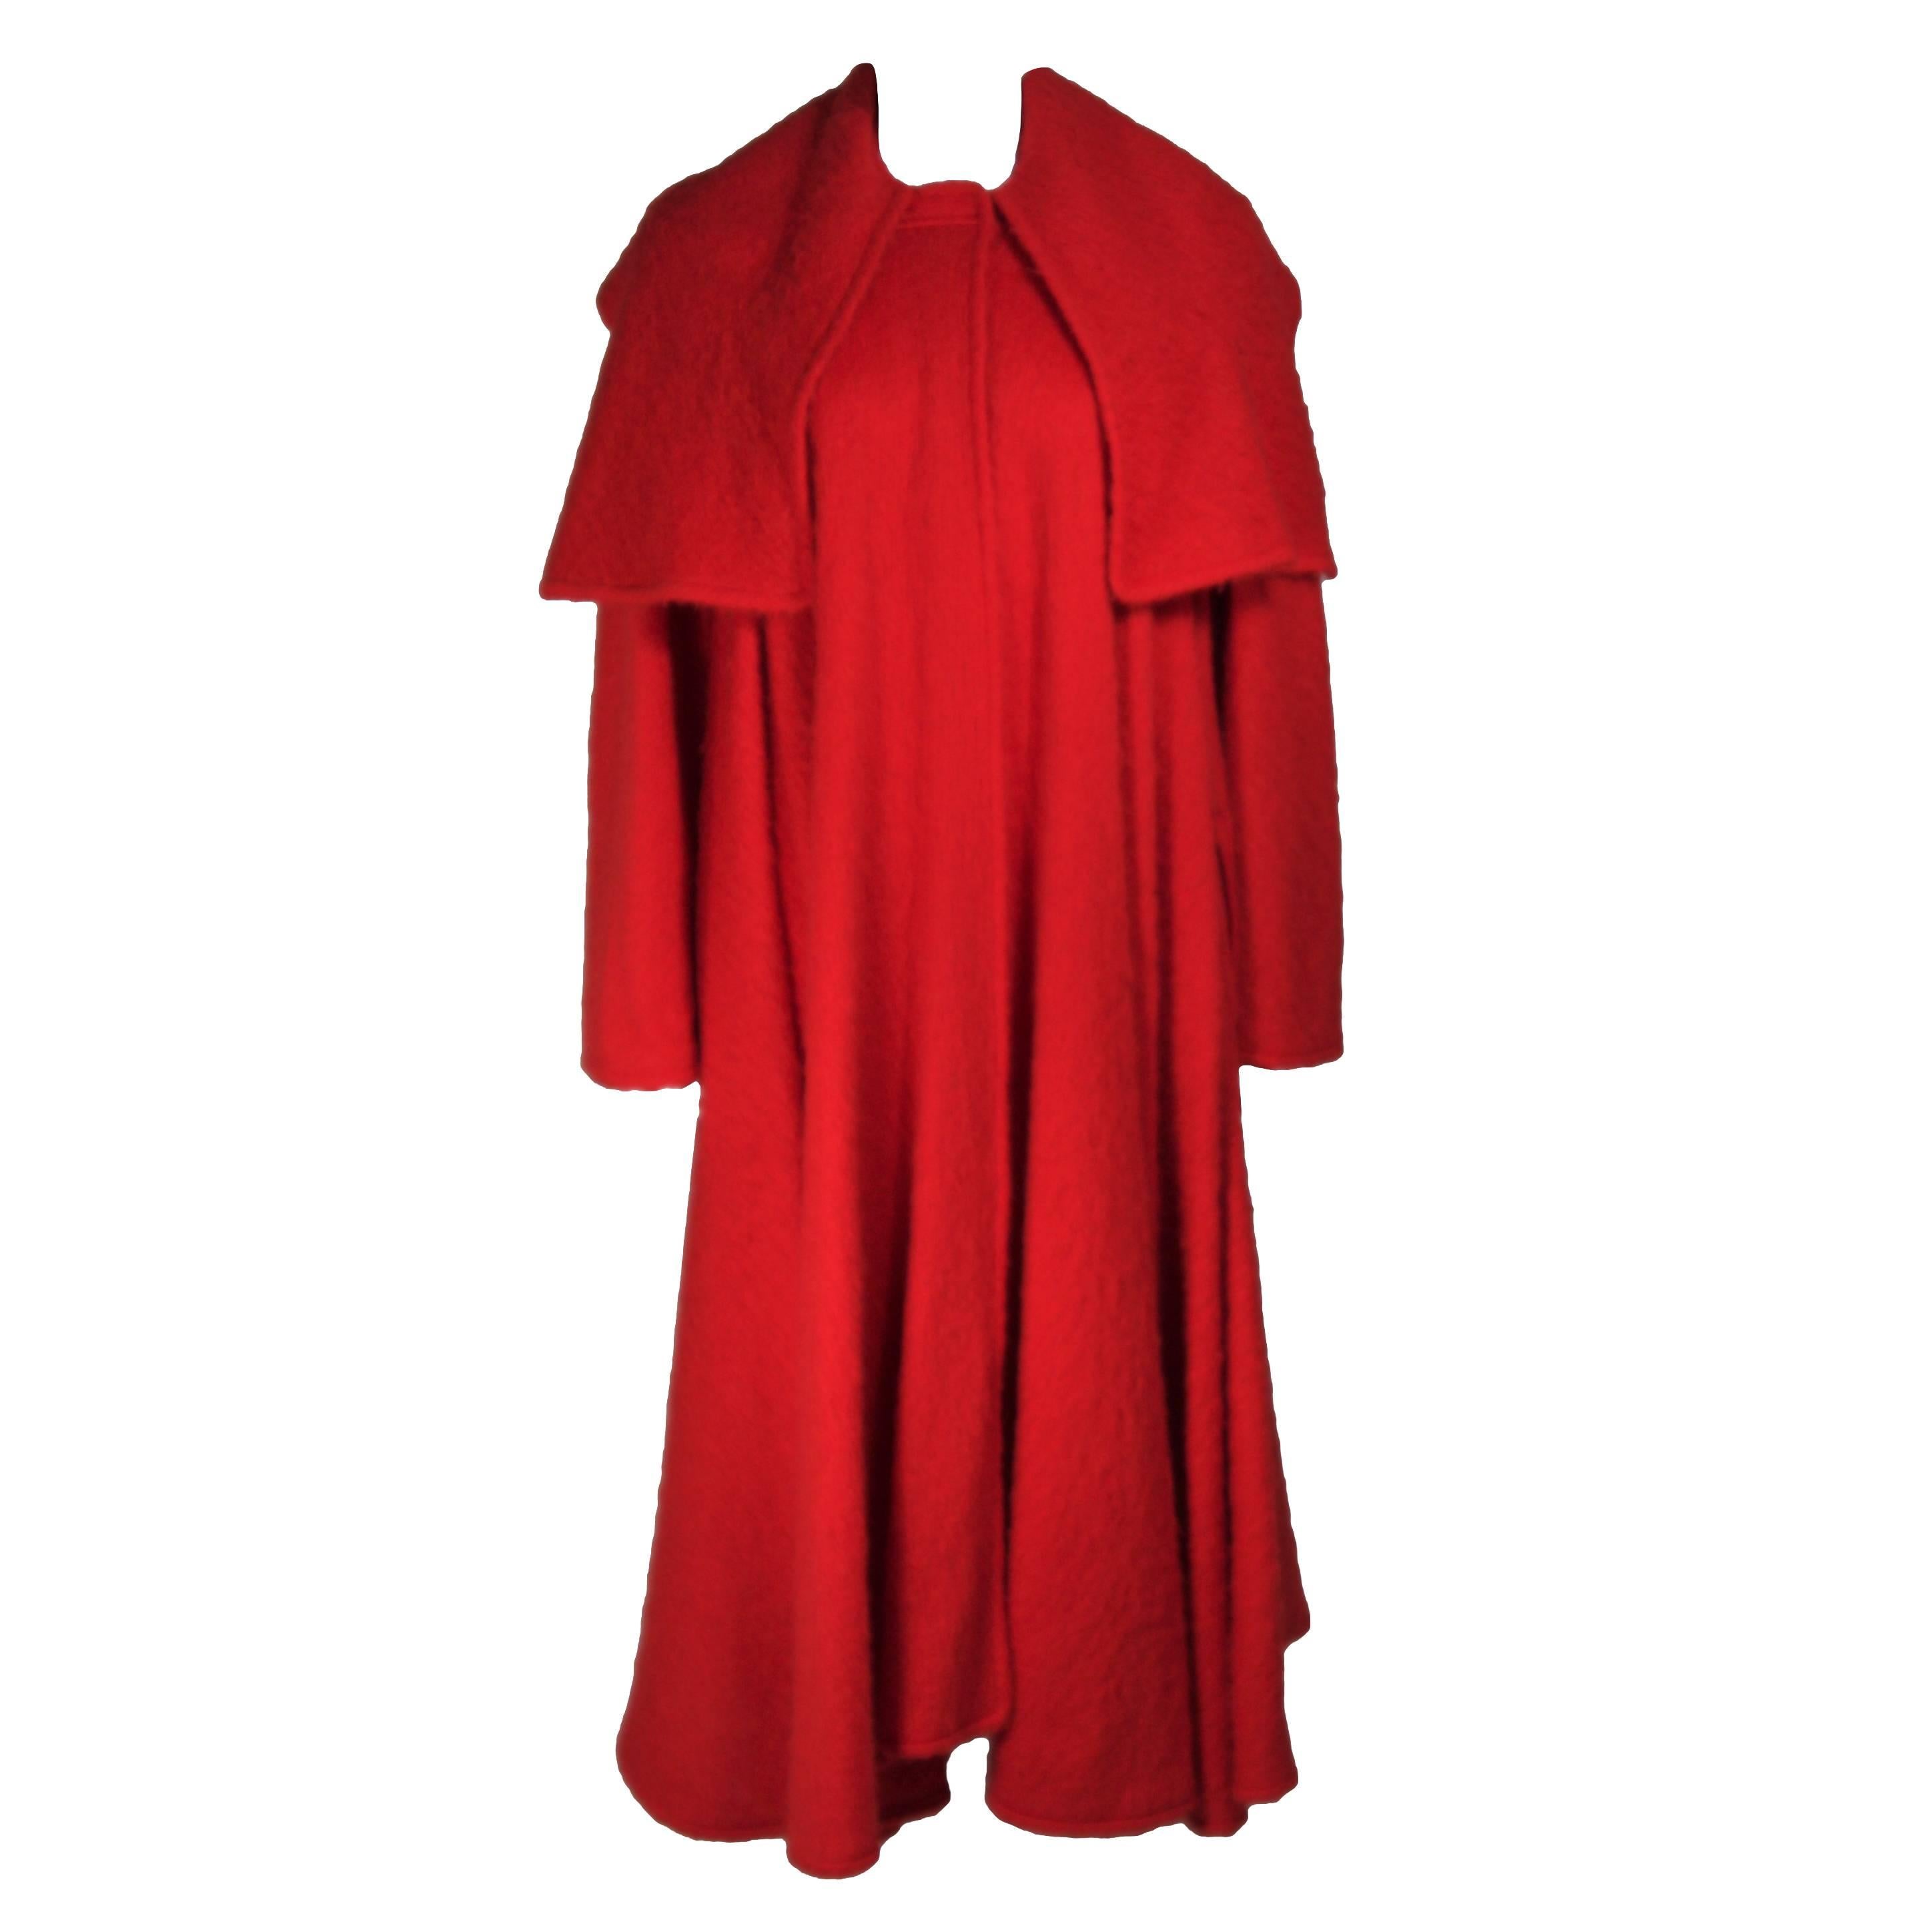 VALENTINO Circa 1980's Dramatic Red Mohair Coat with Draped Collar 